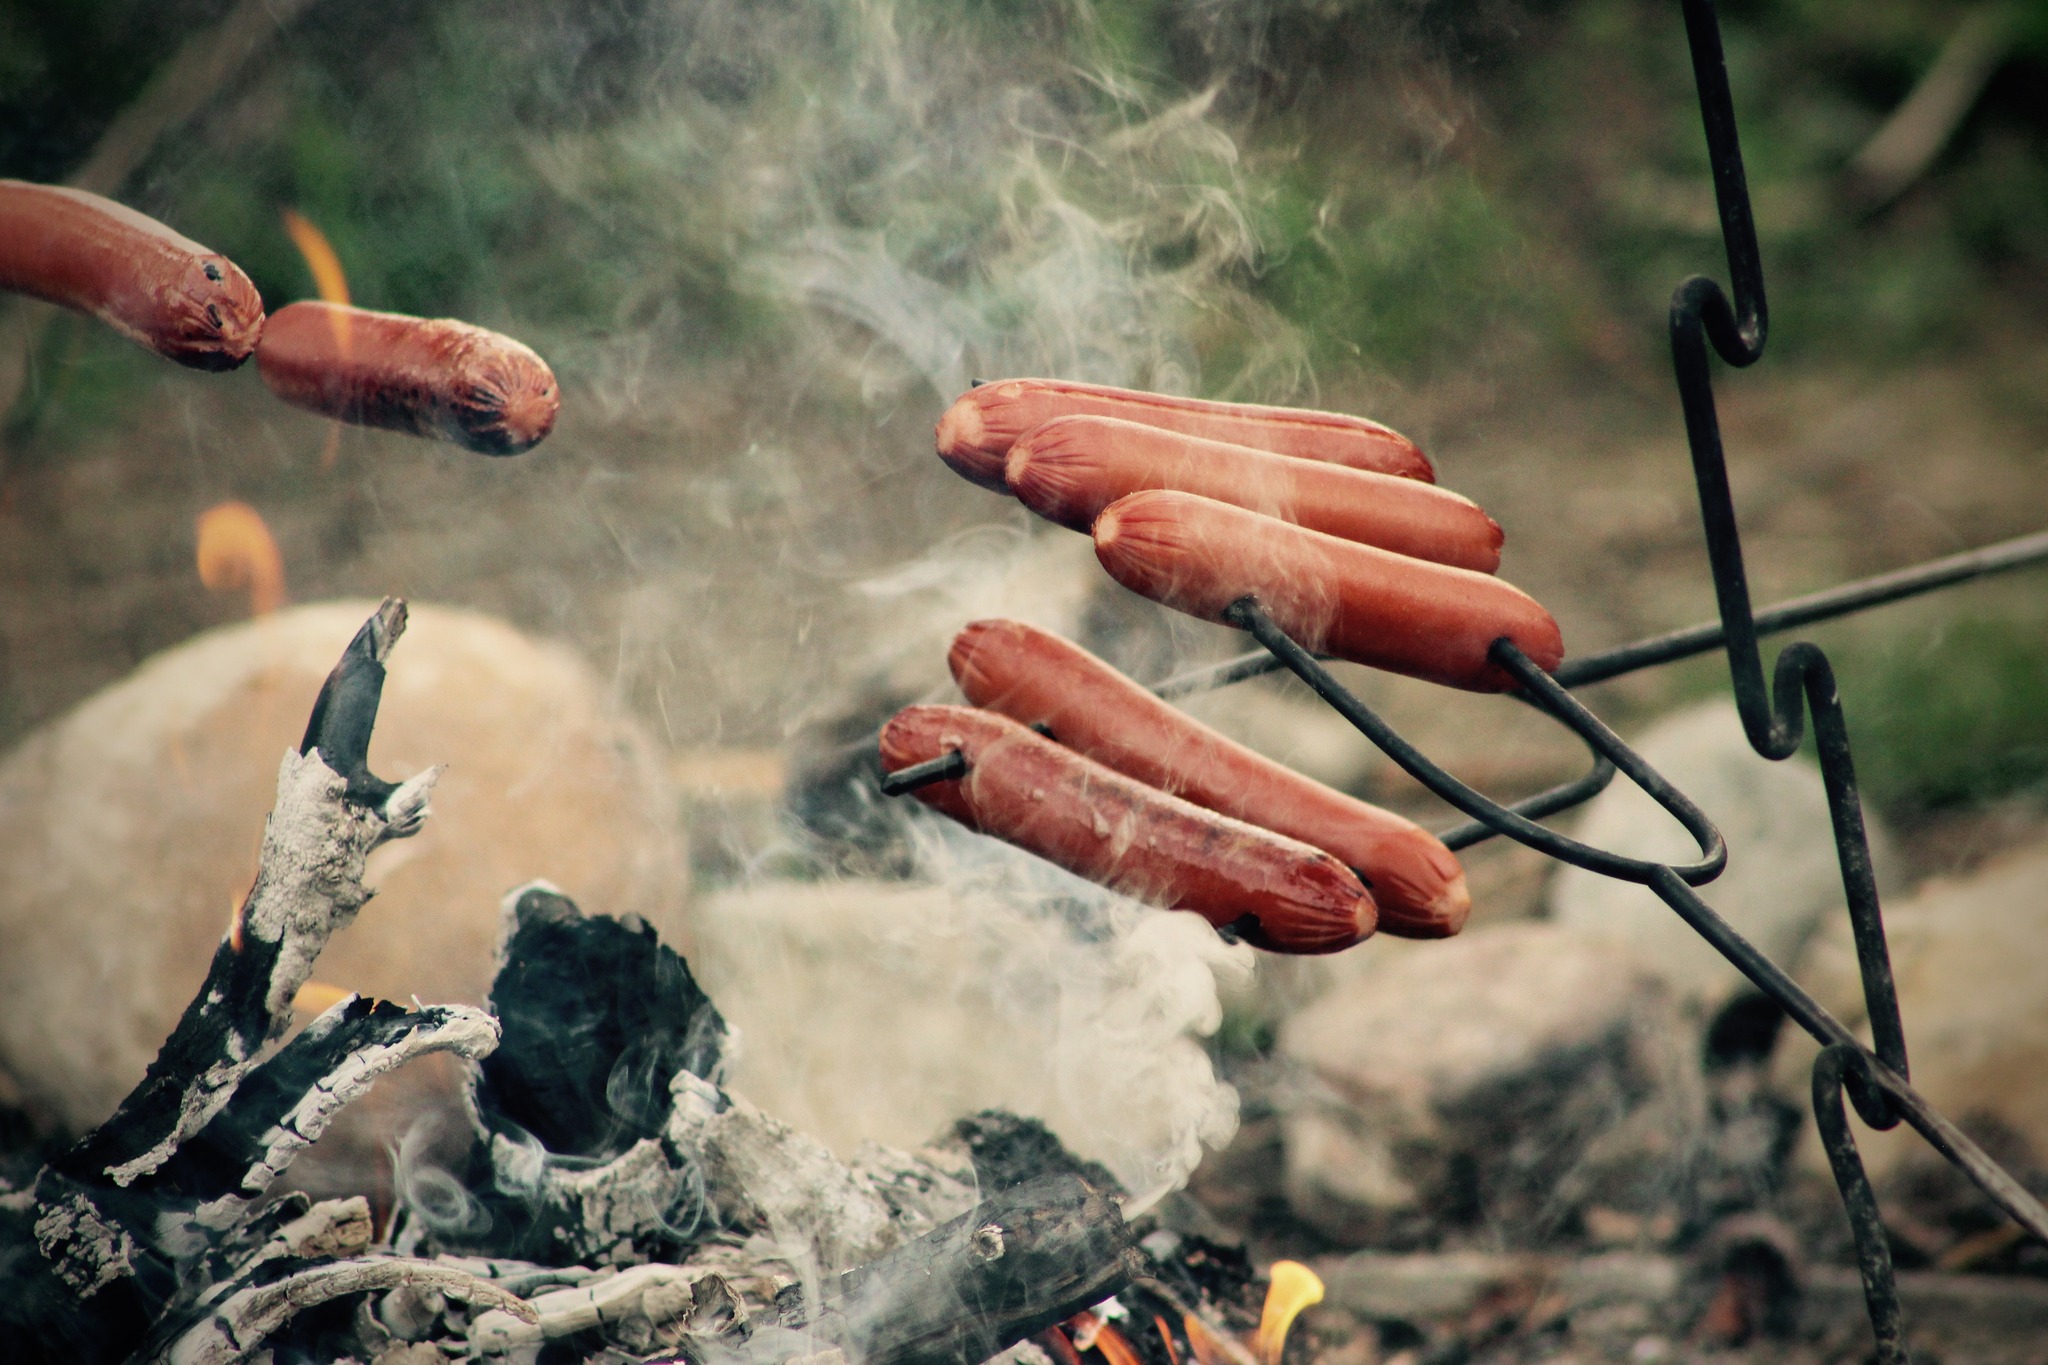 Hot dogs are speared on roasting tools over a firepit. The background is blurred out, but looks like rocks and grass. Photo from Sleepy Creek Vineyard Wieners & Wine Facebook event page.